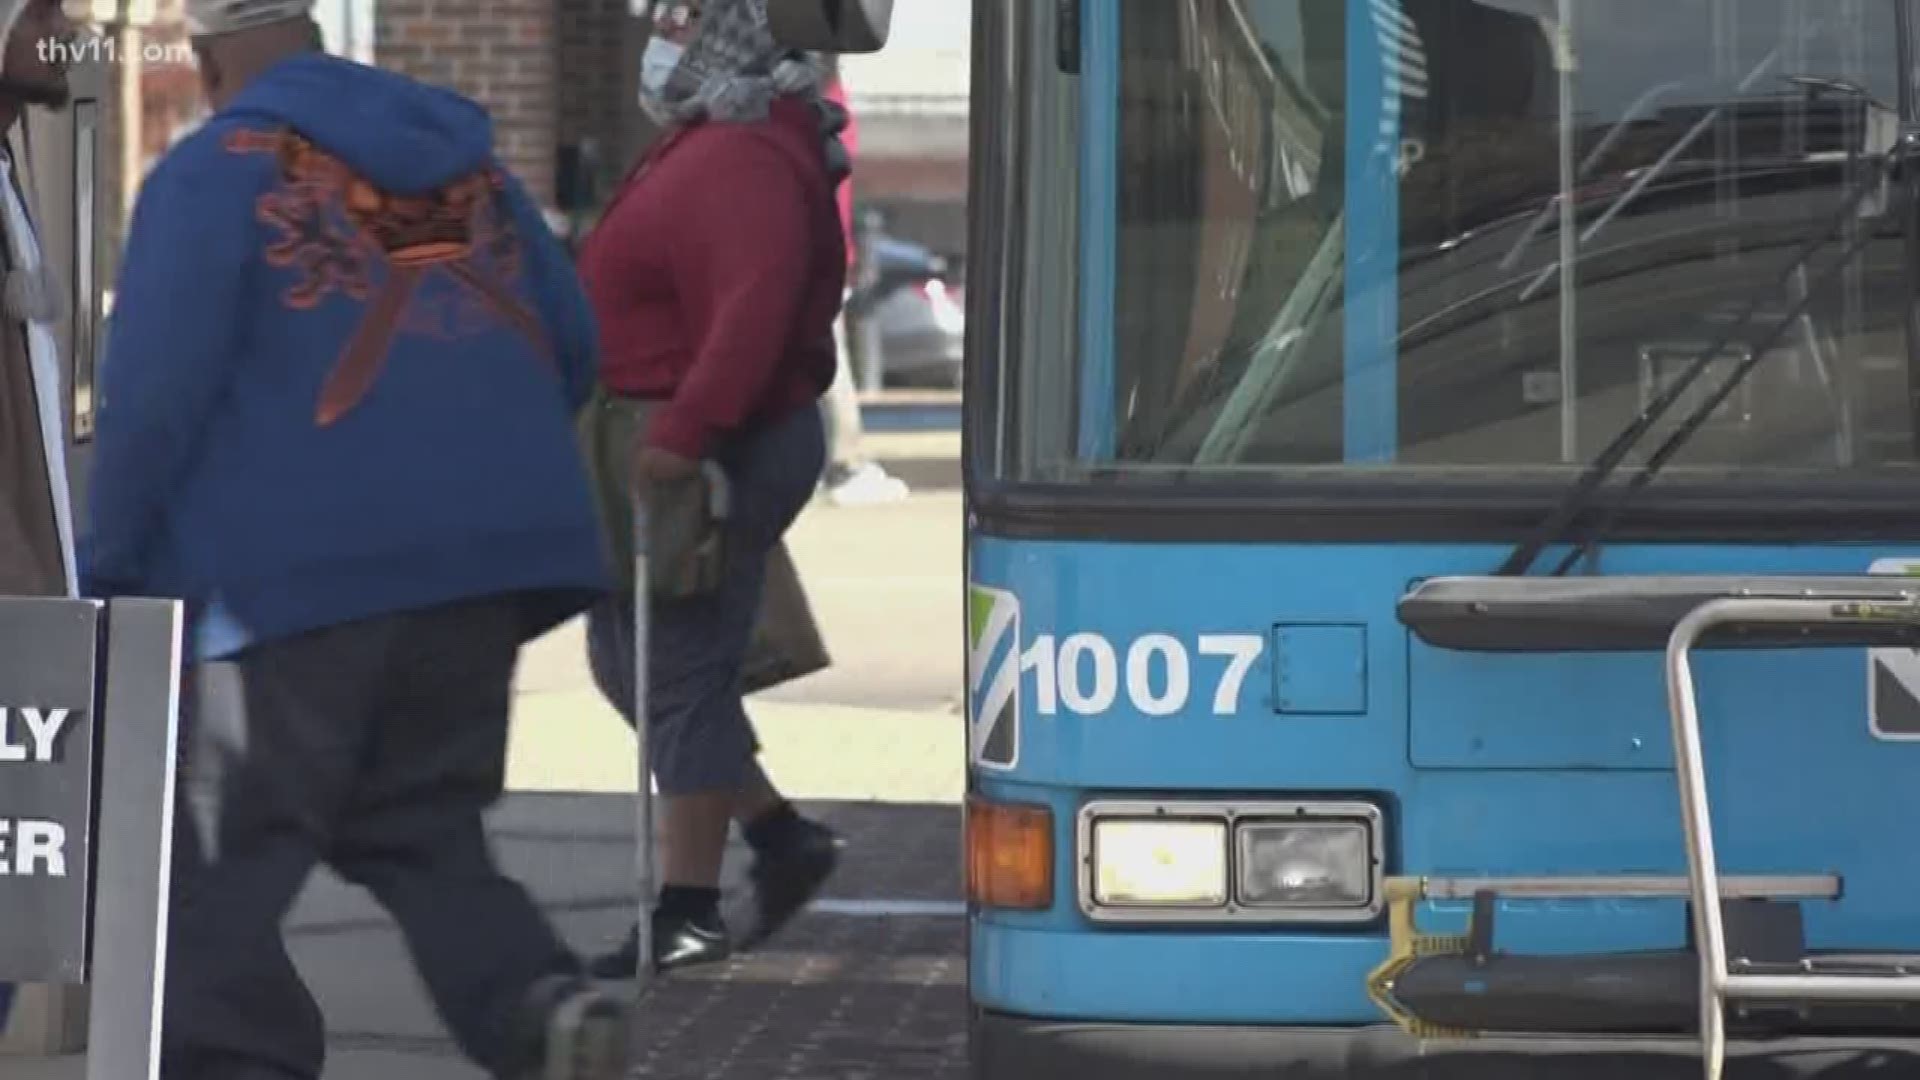 At least 1,000 monthly bus passes are available to any person referred through a homeless service provider.